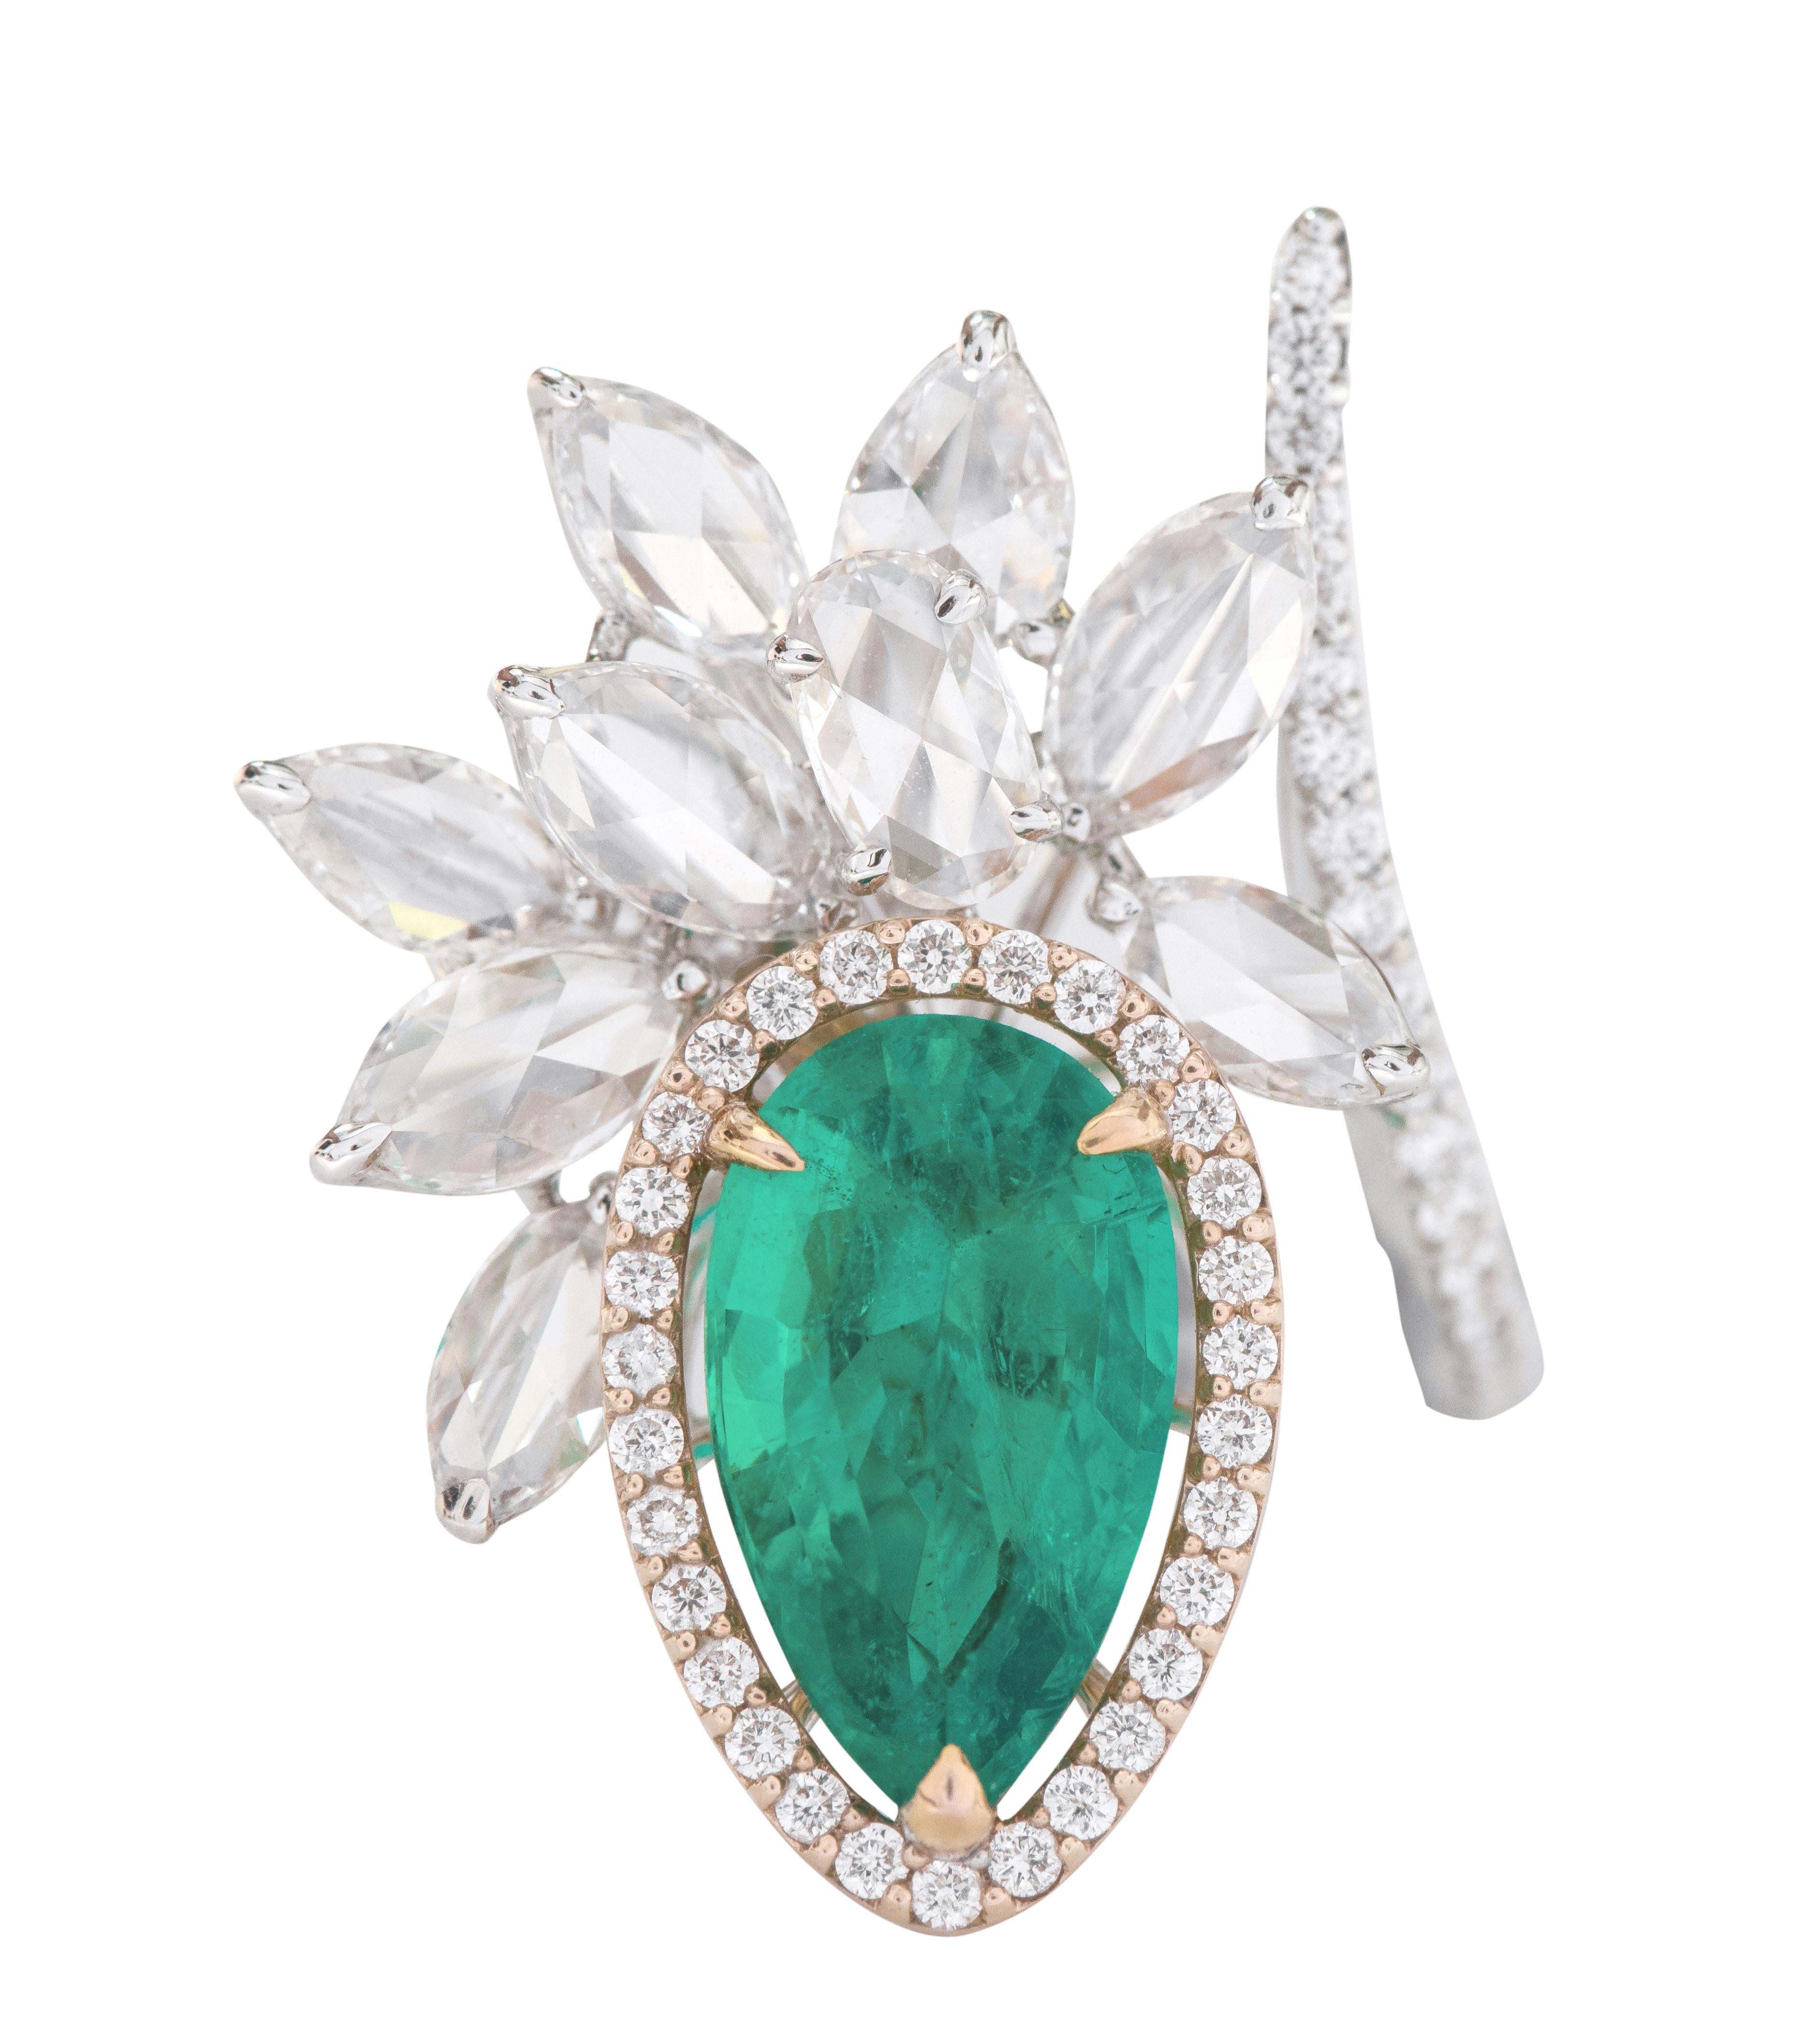 18 Karat Gold 2.93 Carat Pear-Cut Natural Emerald and Diamond Cocktail Ring For Sale 1